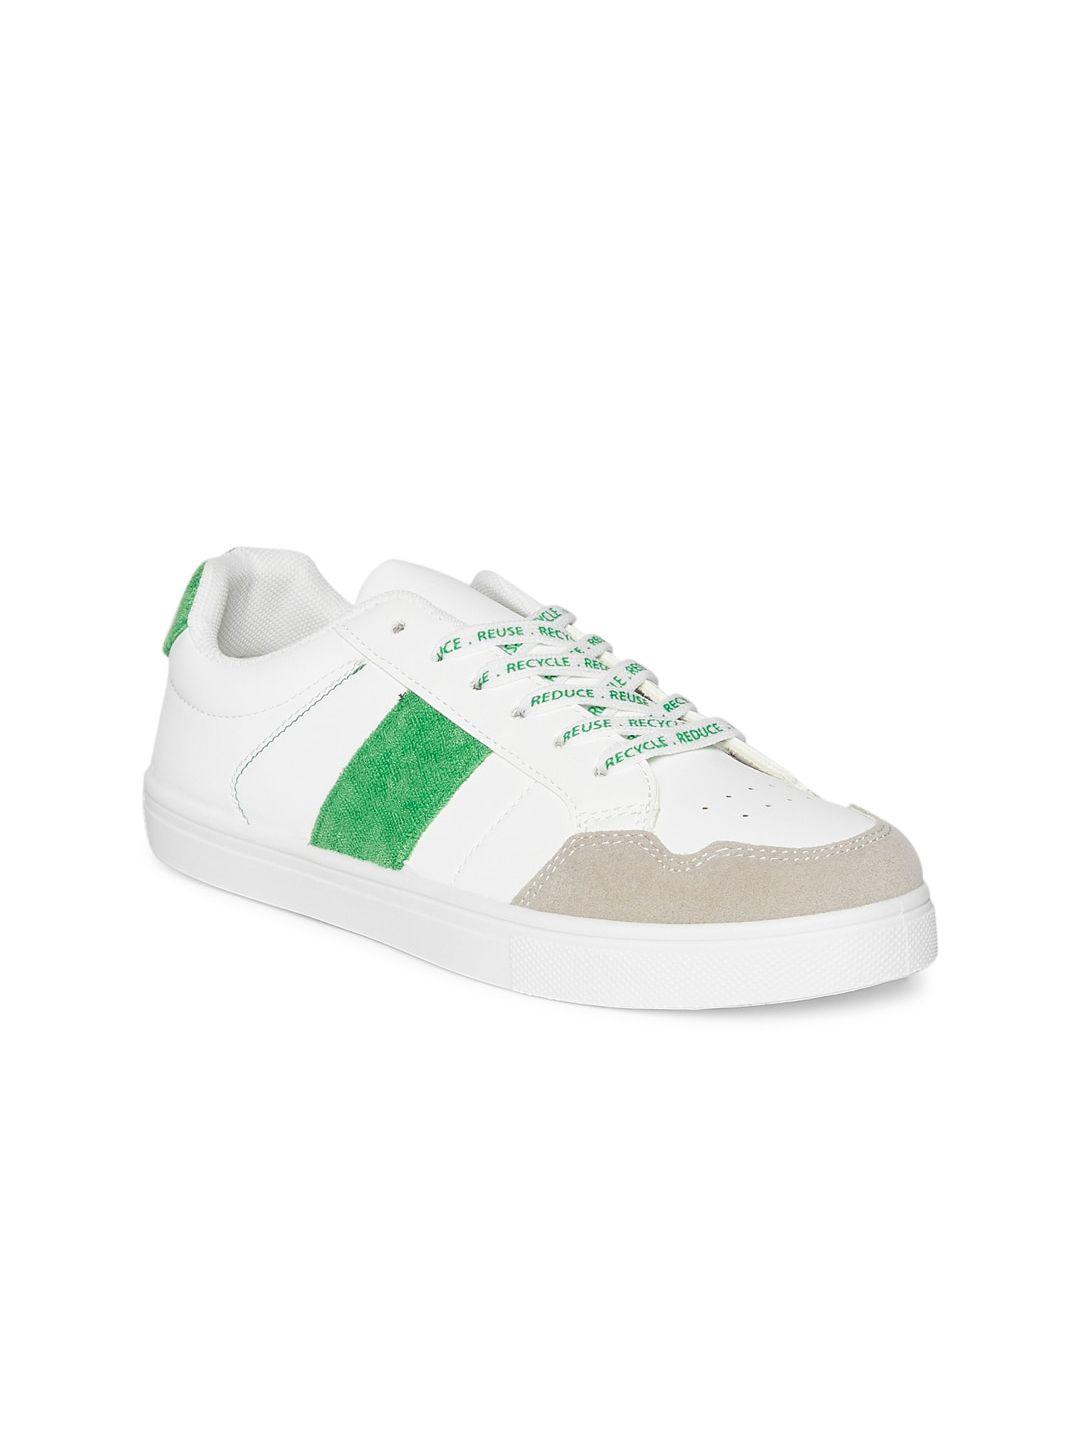 forever glam by pantaloons women colourblocked sneakers